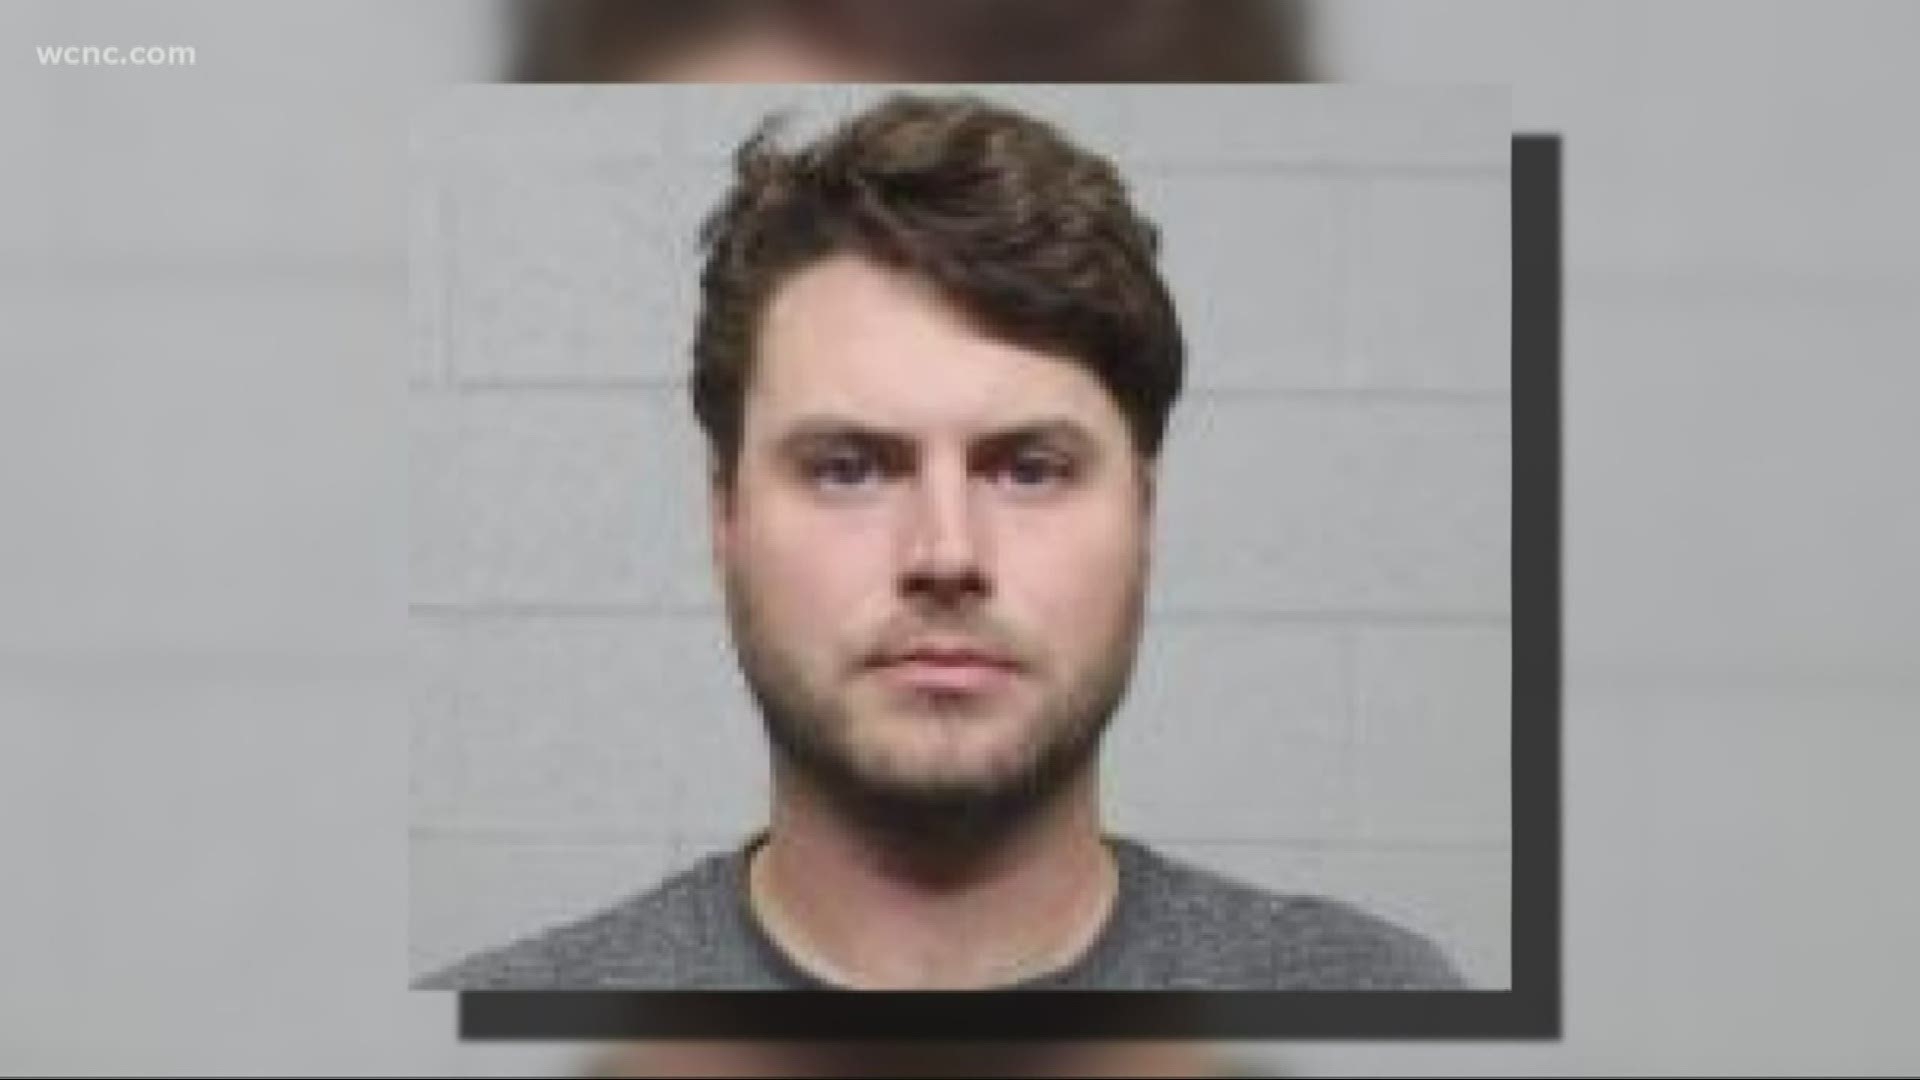 He was already arrested for public intoxication after the flight was diverted. He's now awaiting a court date in Oklahoma for the federal sex crime he's facing.